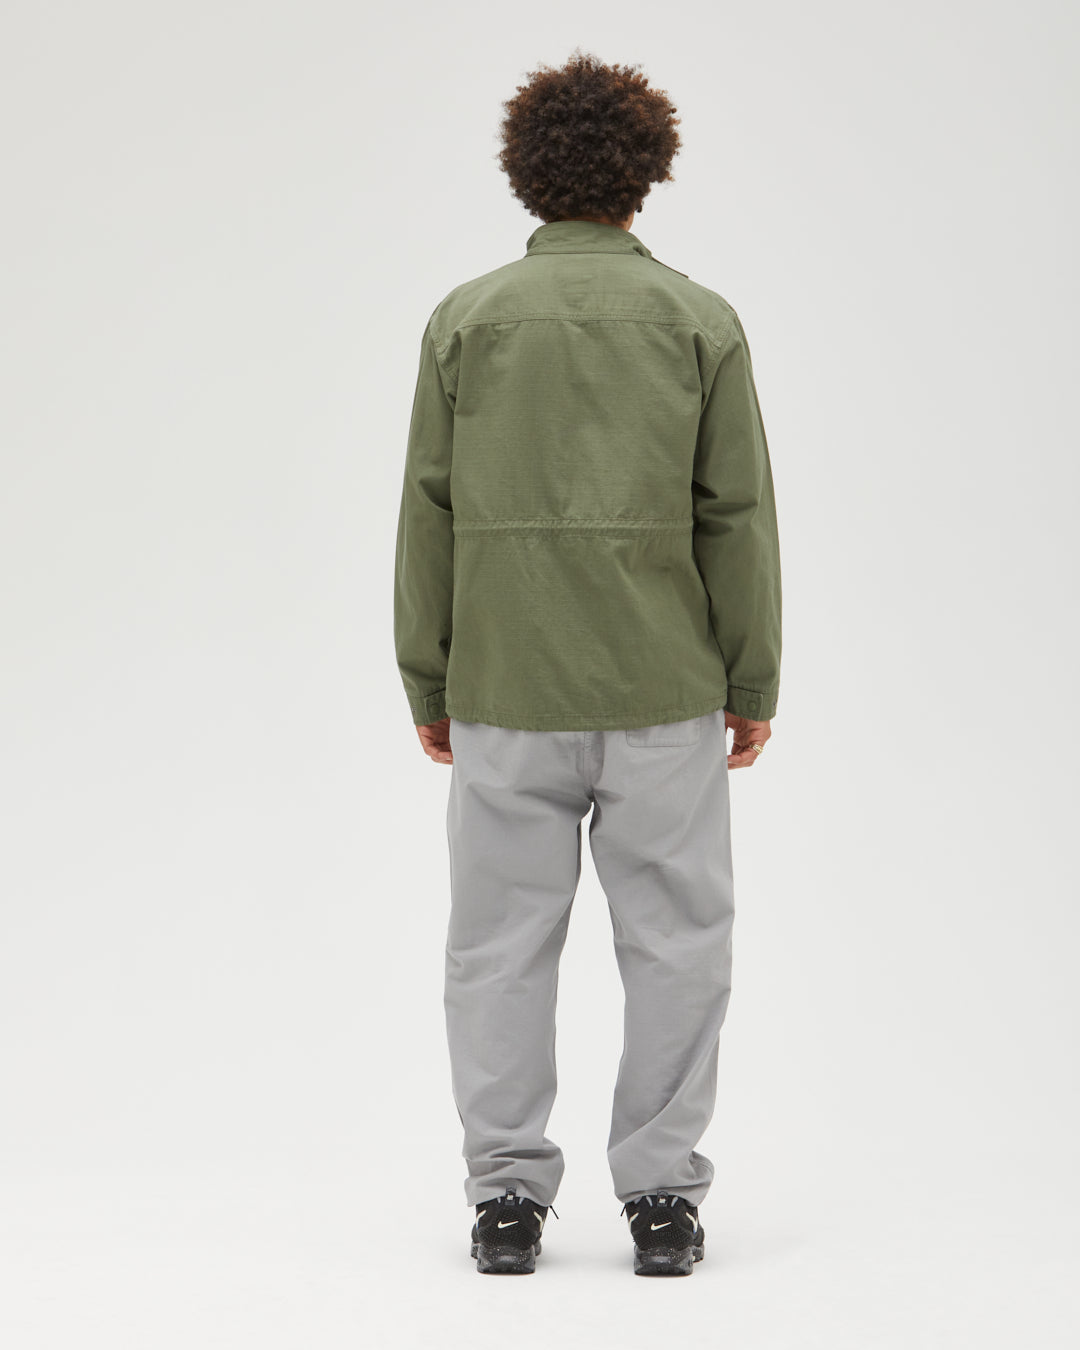 UNDEFEATED RIPSTOP M65 JACKET- OLIVE